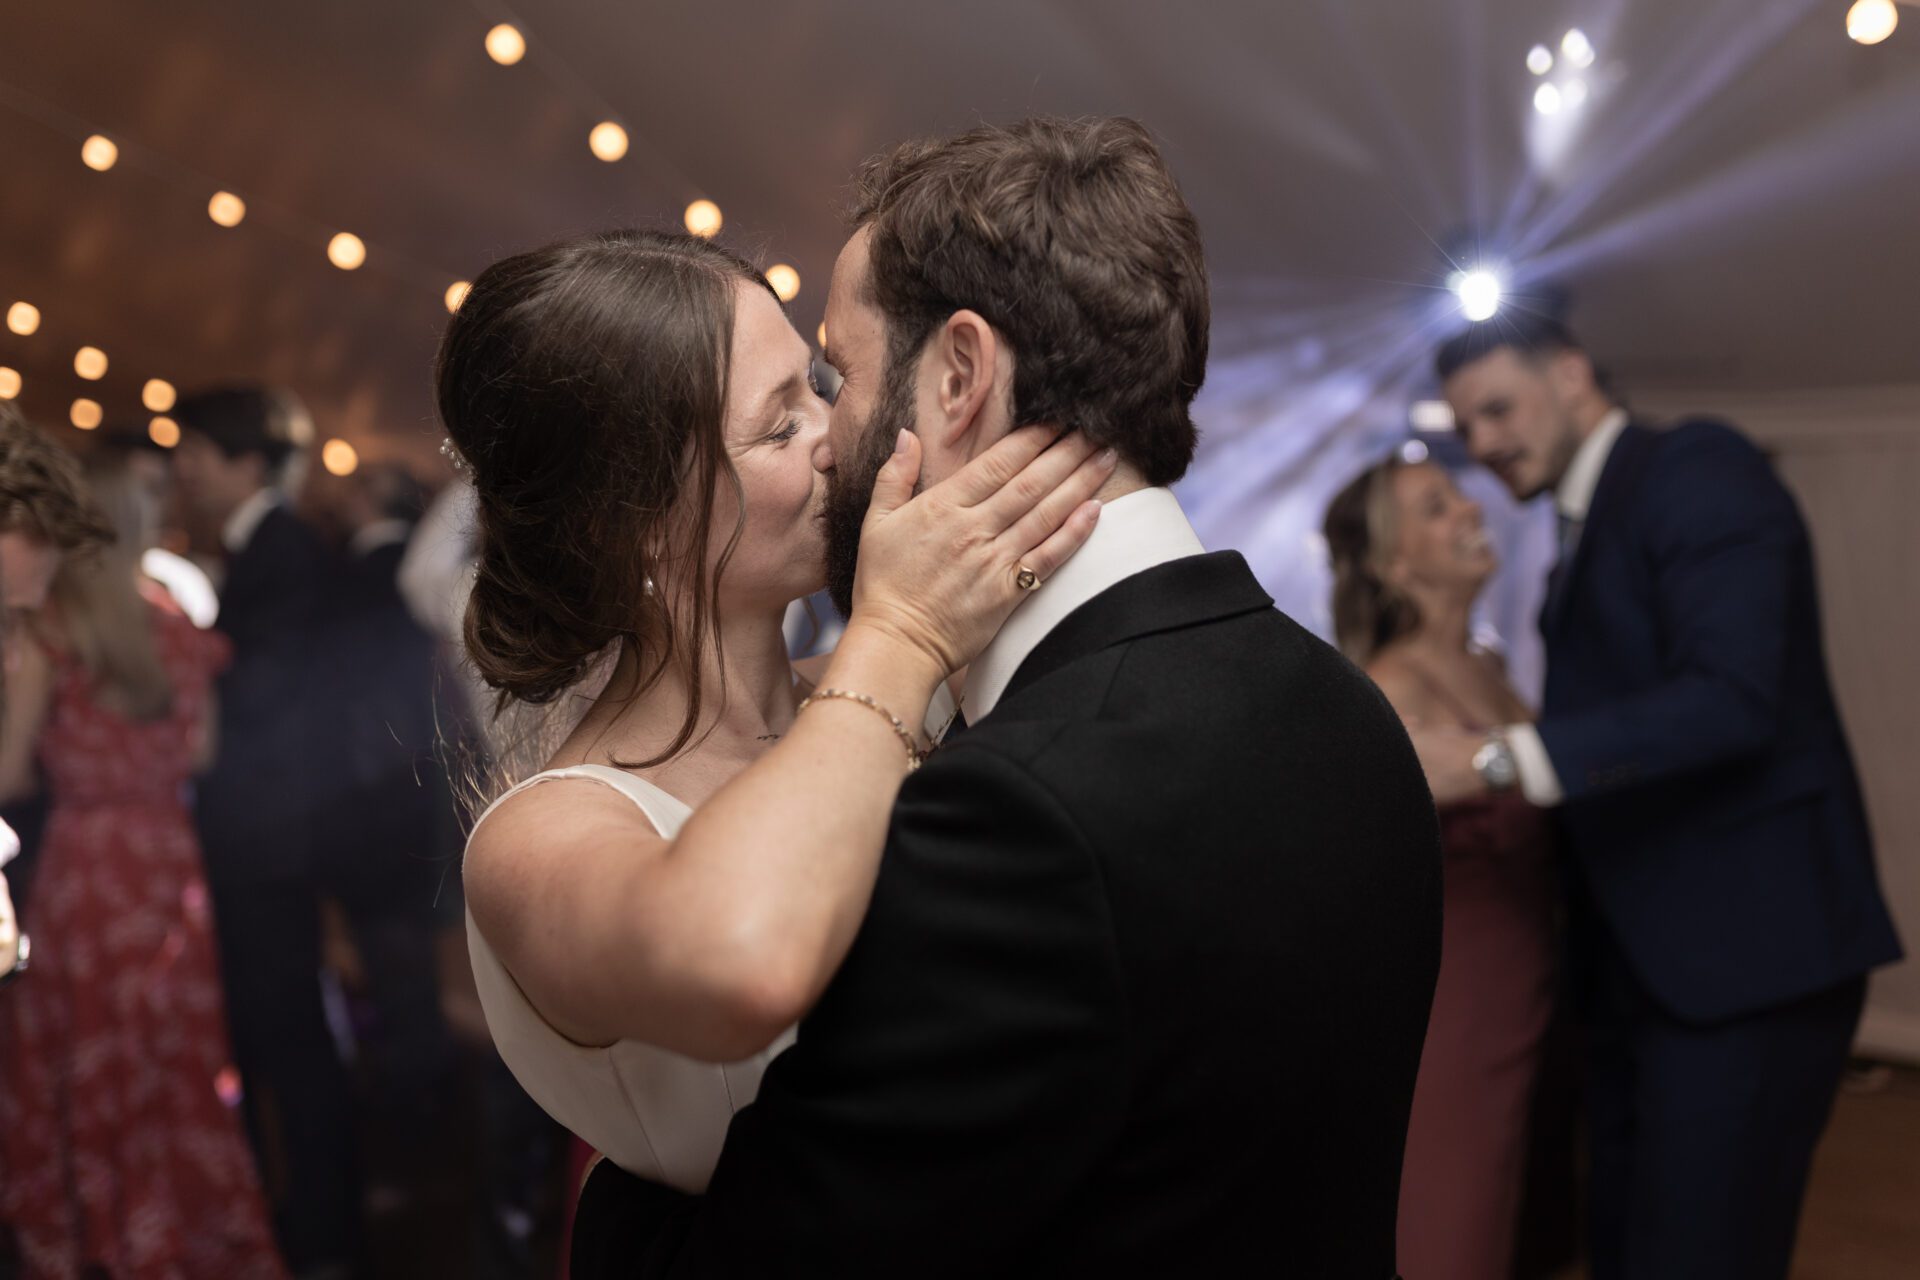 The bride and groom share a kiss on the dance floor